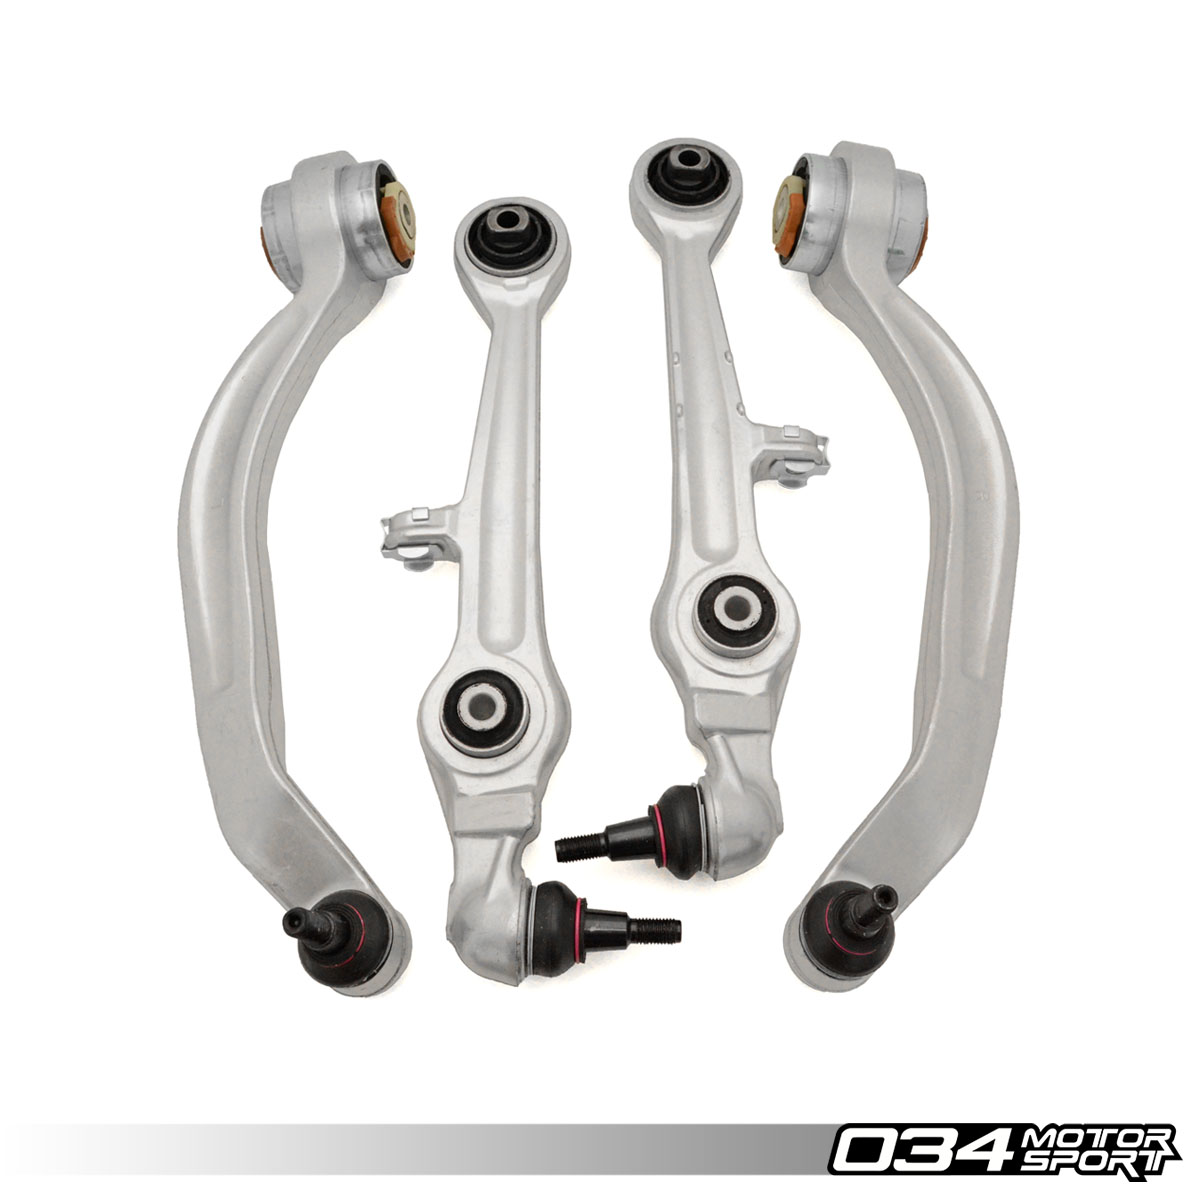 4 New Pc Front Control Arms Ball Joints Kit for Audi A4 A6 S6 Volkswagen Passat